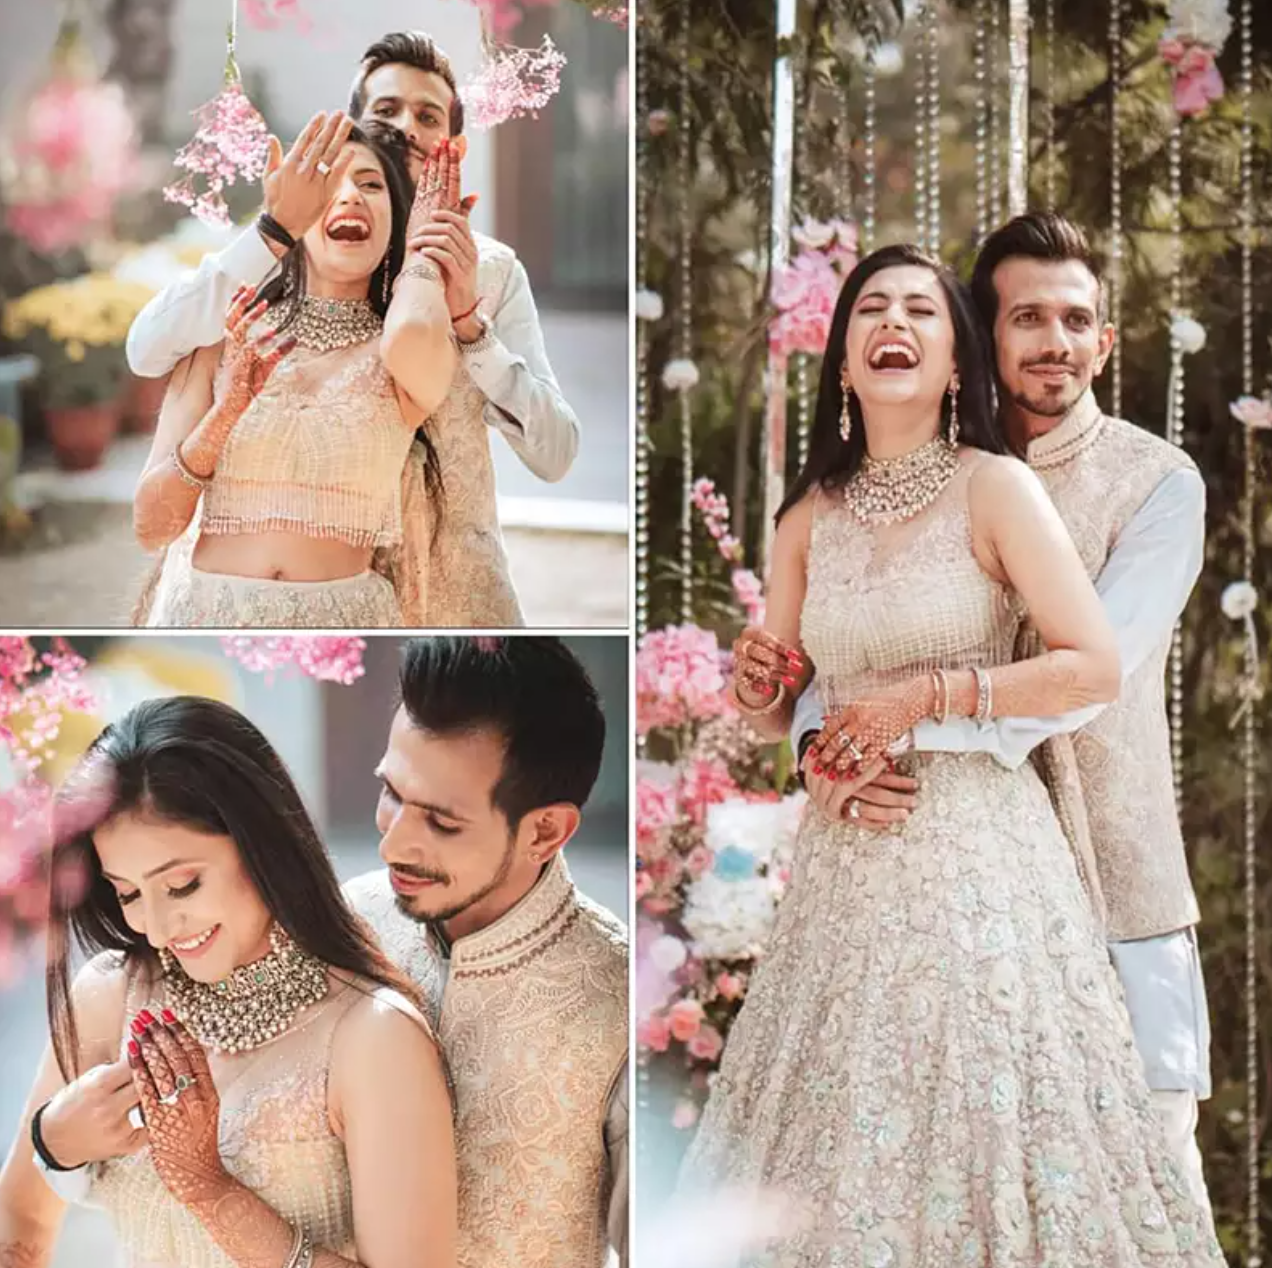 Dreamy wedding pictures of sports stars